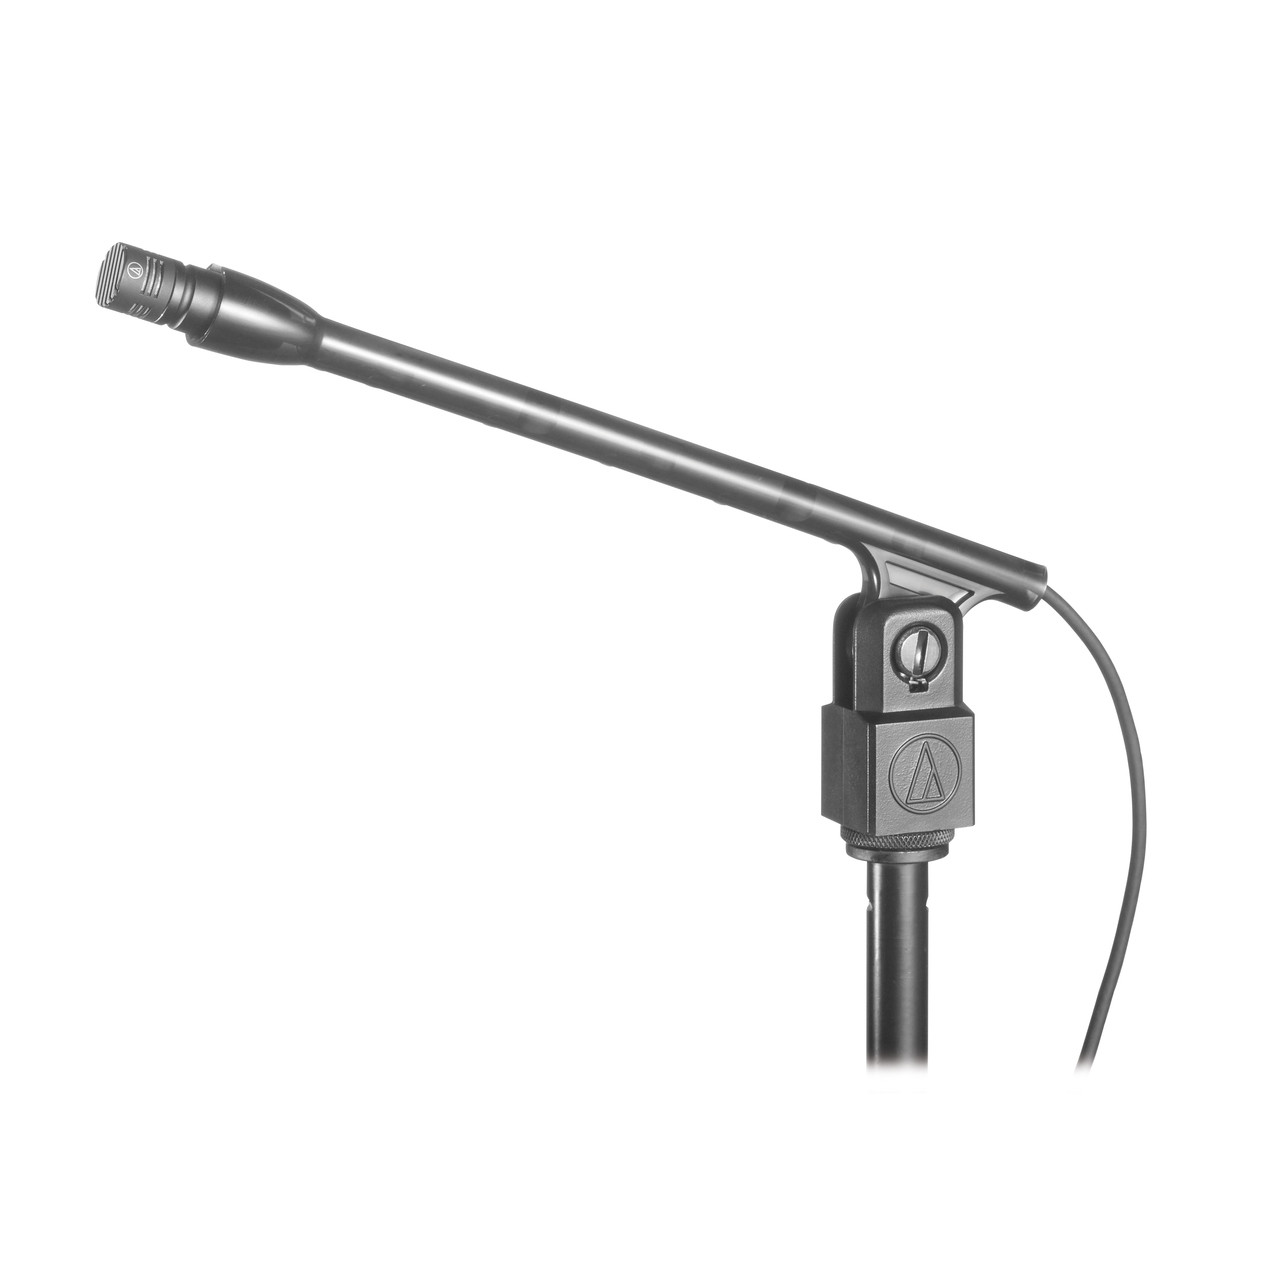 Audio-Technica AT8438 mic desk stand adapter mount - shown with Mic (not included)